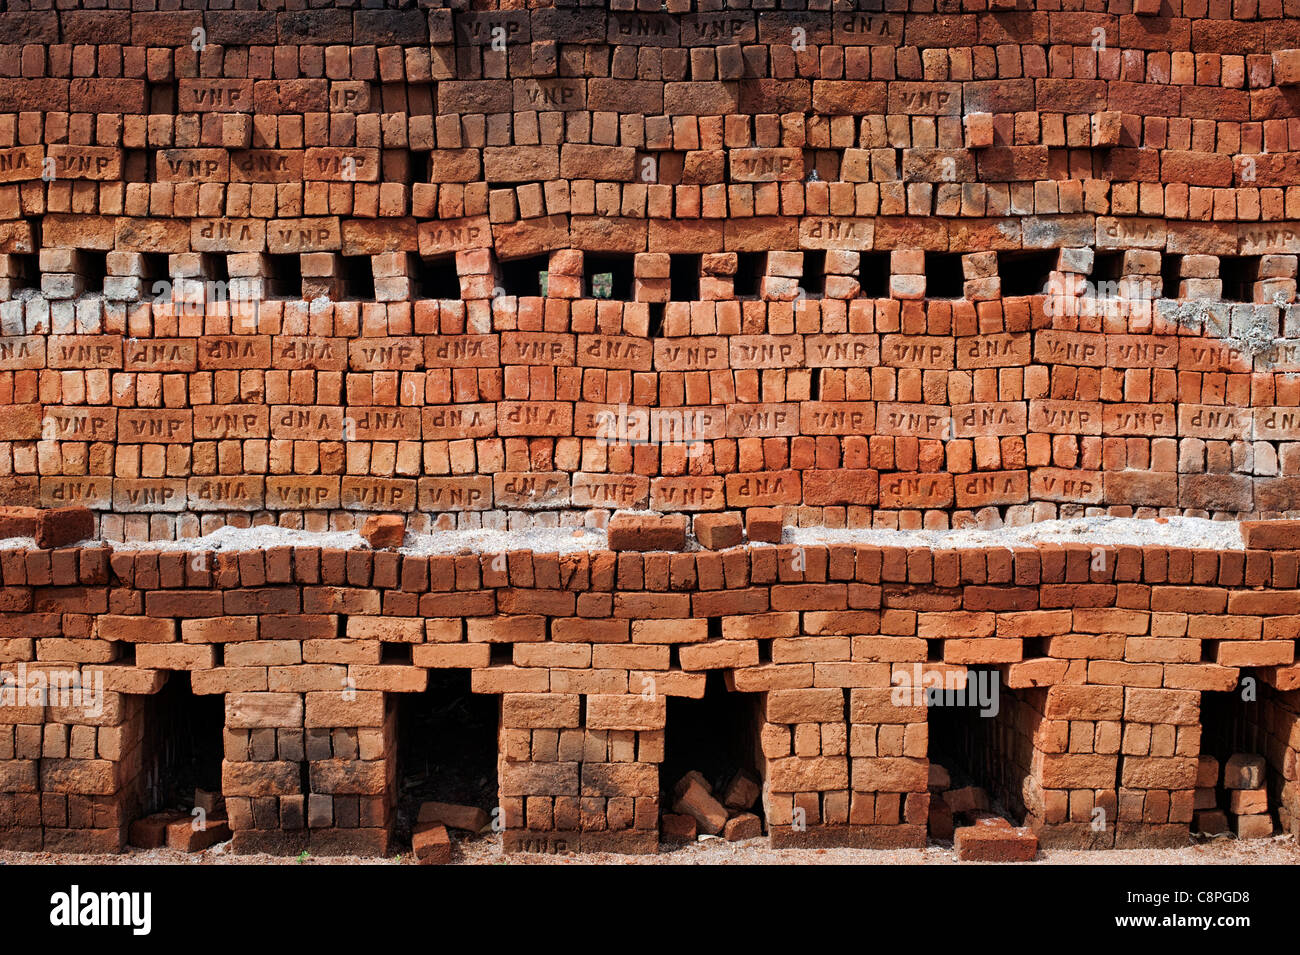 indian-brick-kiln-after-firing-hand-made-house-bricks-in-the-rural-stock-photo-royalty-free